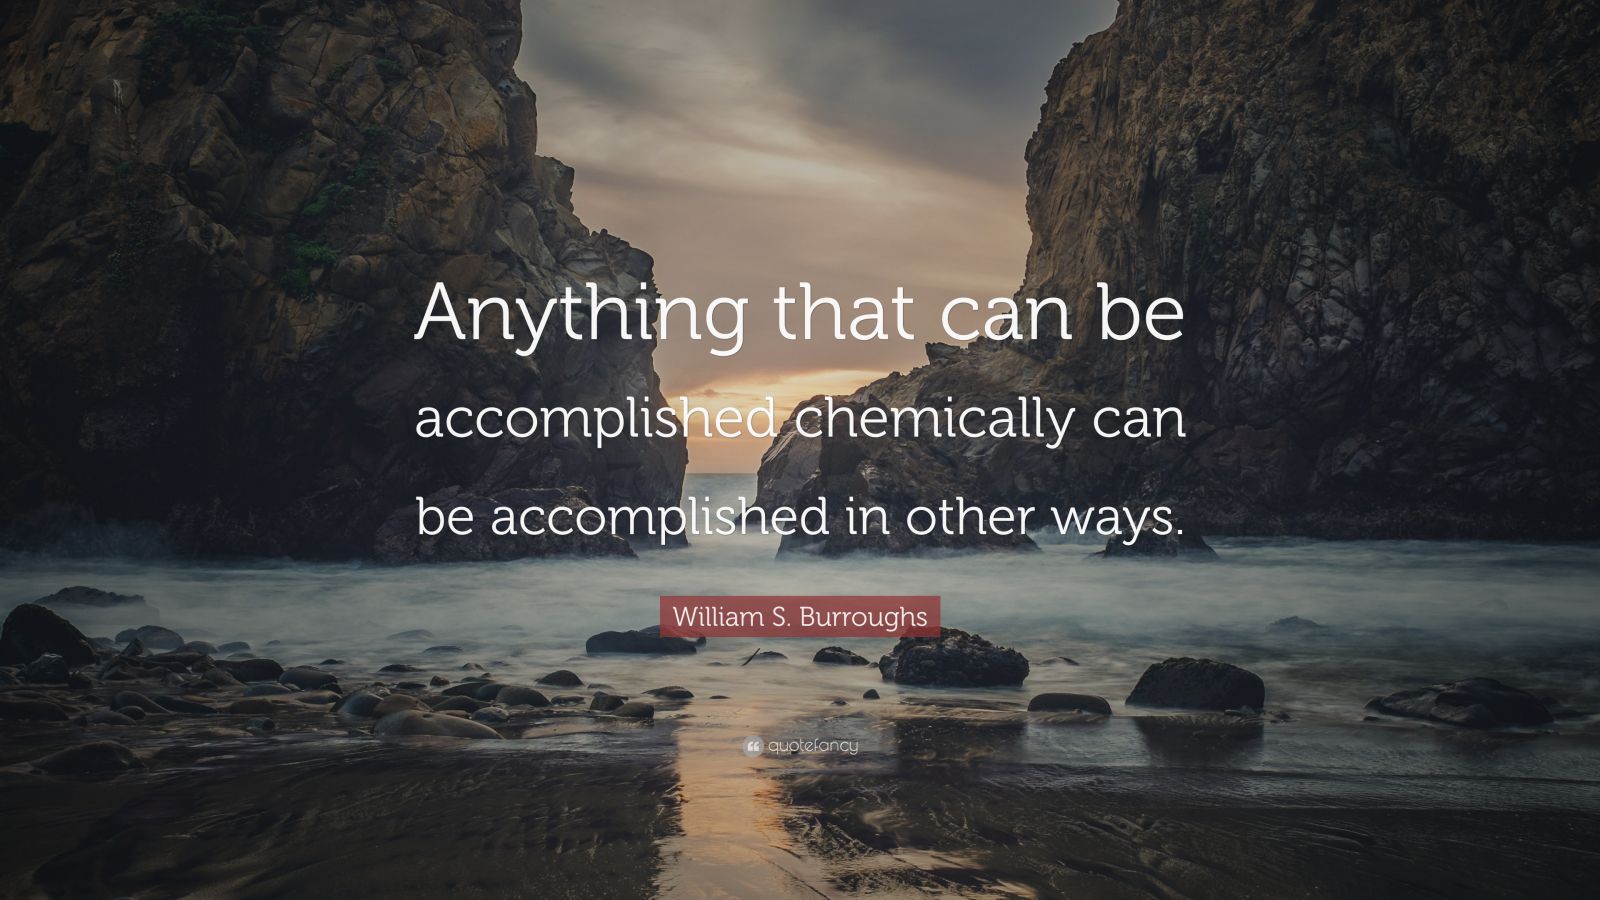 William S. Burroughs Quote: “Anything that can be accomplished ...